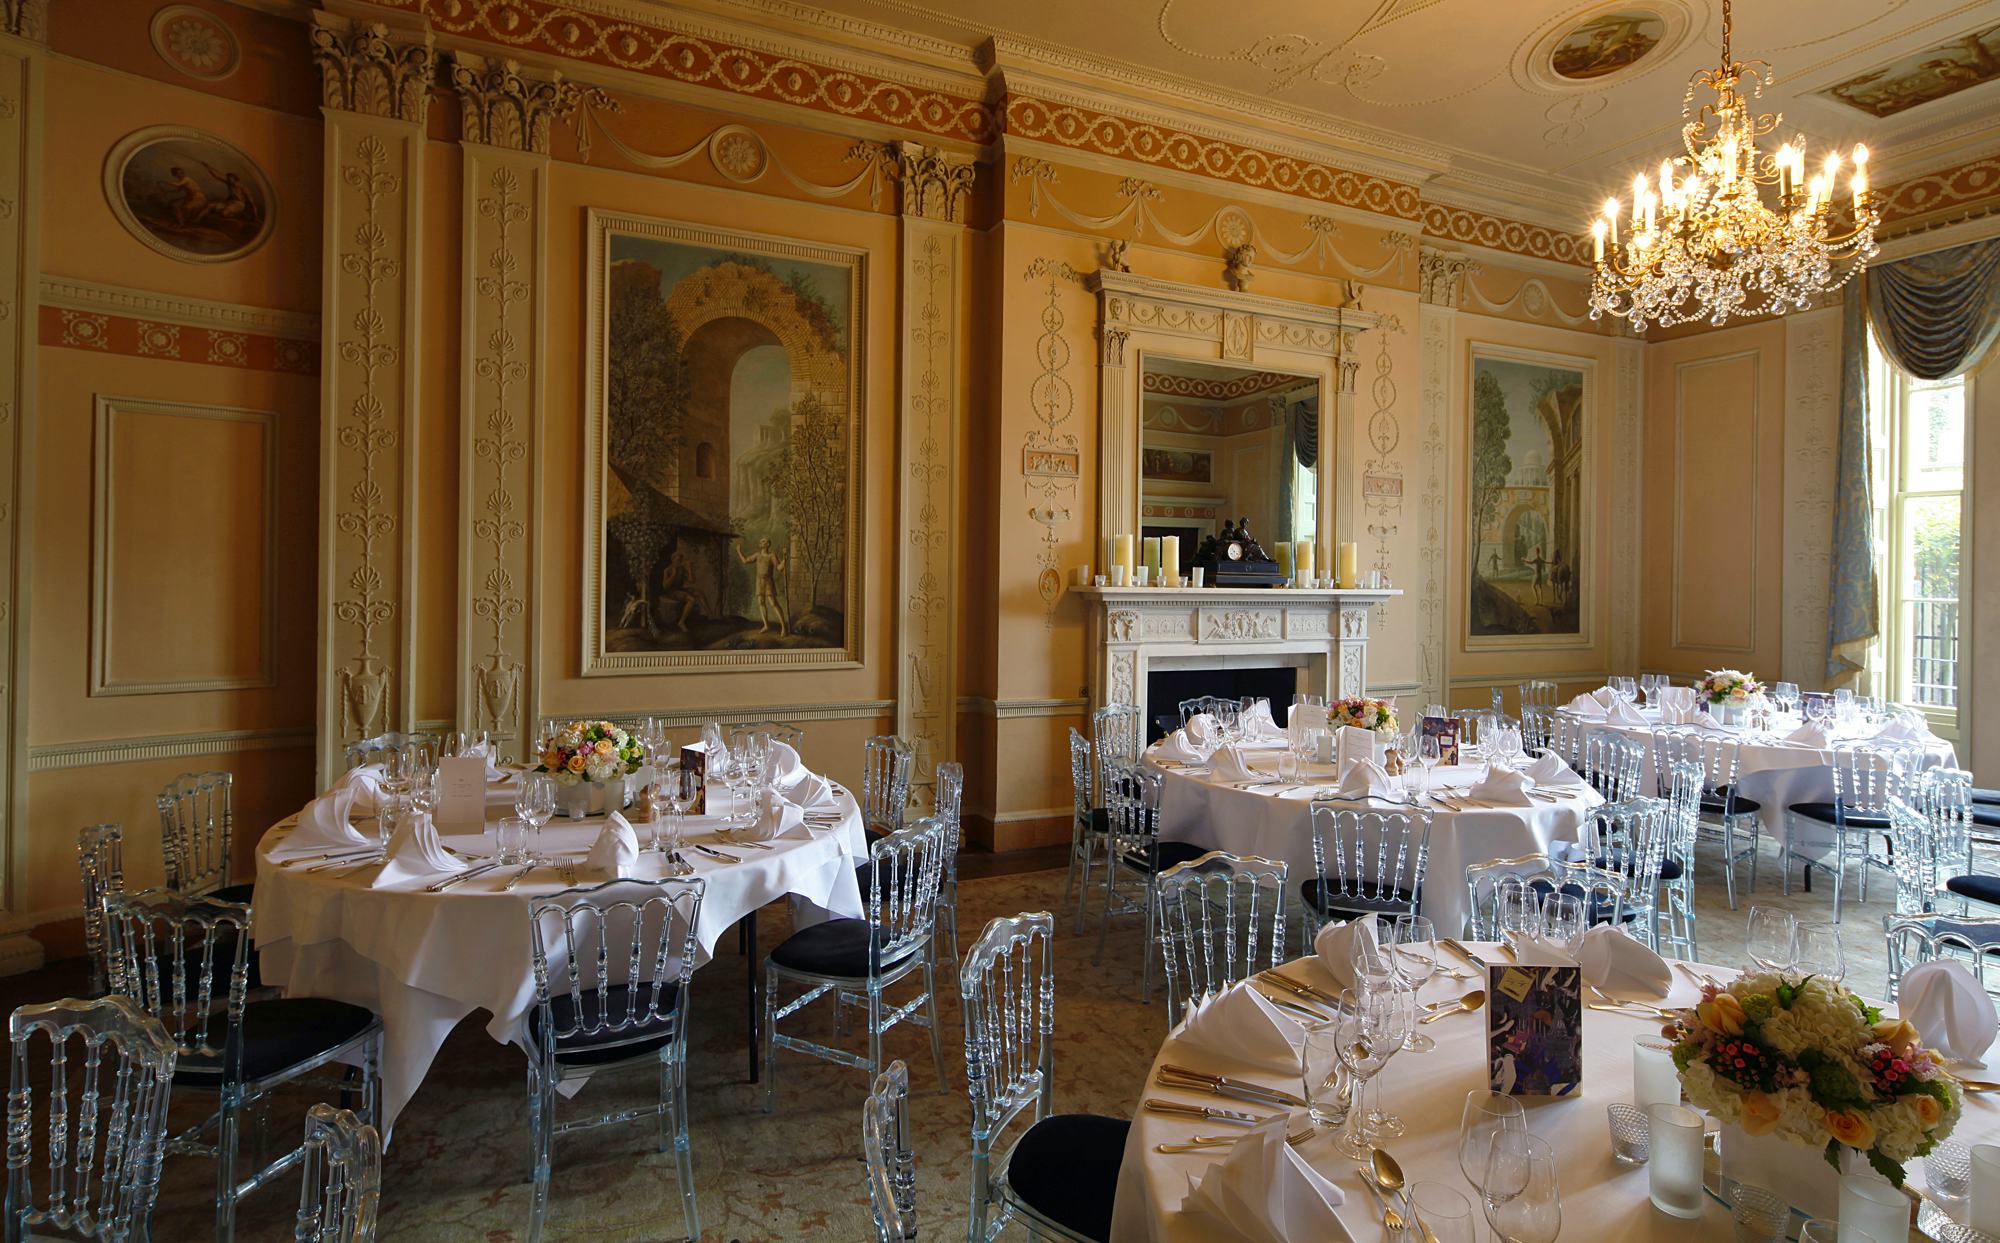 Home House private members clubs london venue hire events eating room banqueting